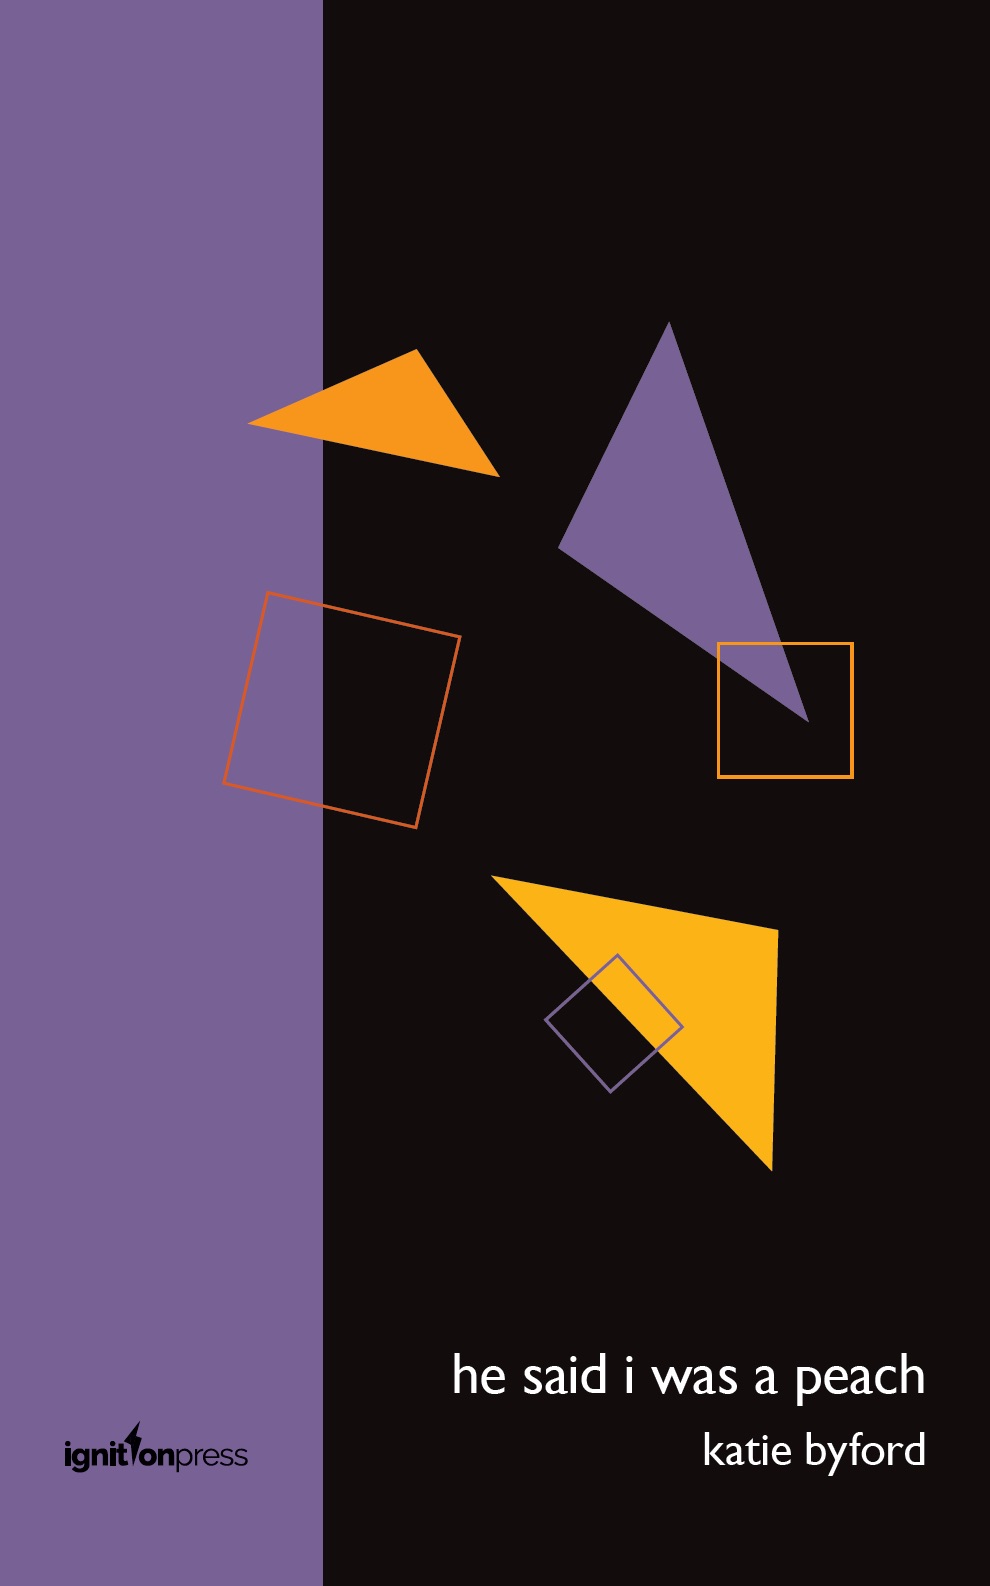 The jacket follows house style design for ignitionpress. It is divided into two vertical colour areas. The right hand two thirds is black. The left hand vertical band is mauve. There are three triangles floating on the jacket one of which crosses the colour divide. Two triangles are yellow. One (on the black side) is mauve. Two squares are outlined in yellow. The mauve triangle dips into one of these, on the right. The other is bigger and crosses between black and mauve bands. The title and author's name in white are right justified on the black bottom corner in lower case no caps, the title slightly bigger than the name. The imprint name is in small black letters in the left hand corner on the mauve band.